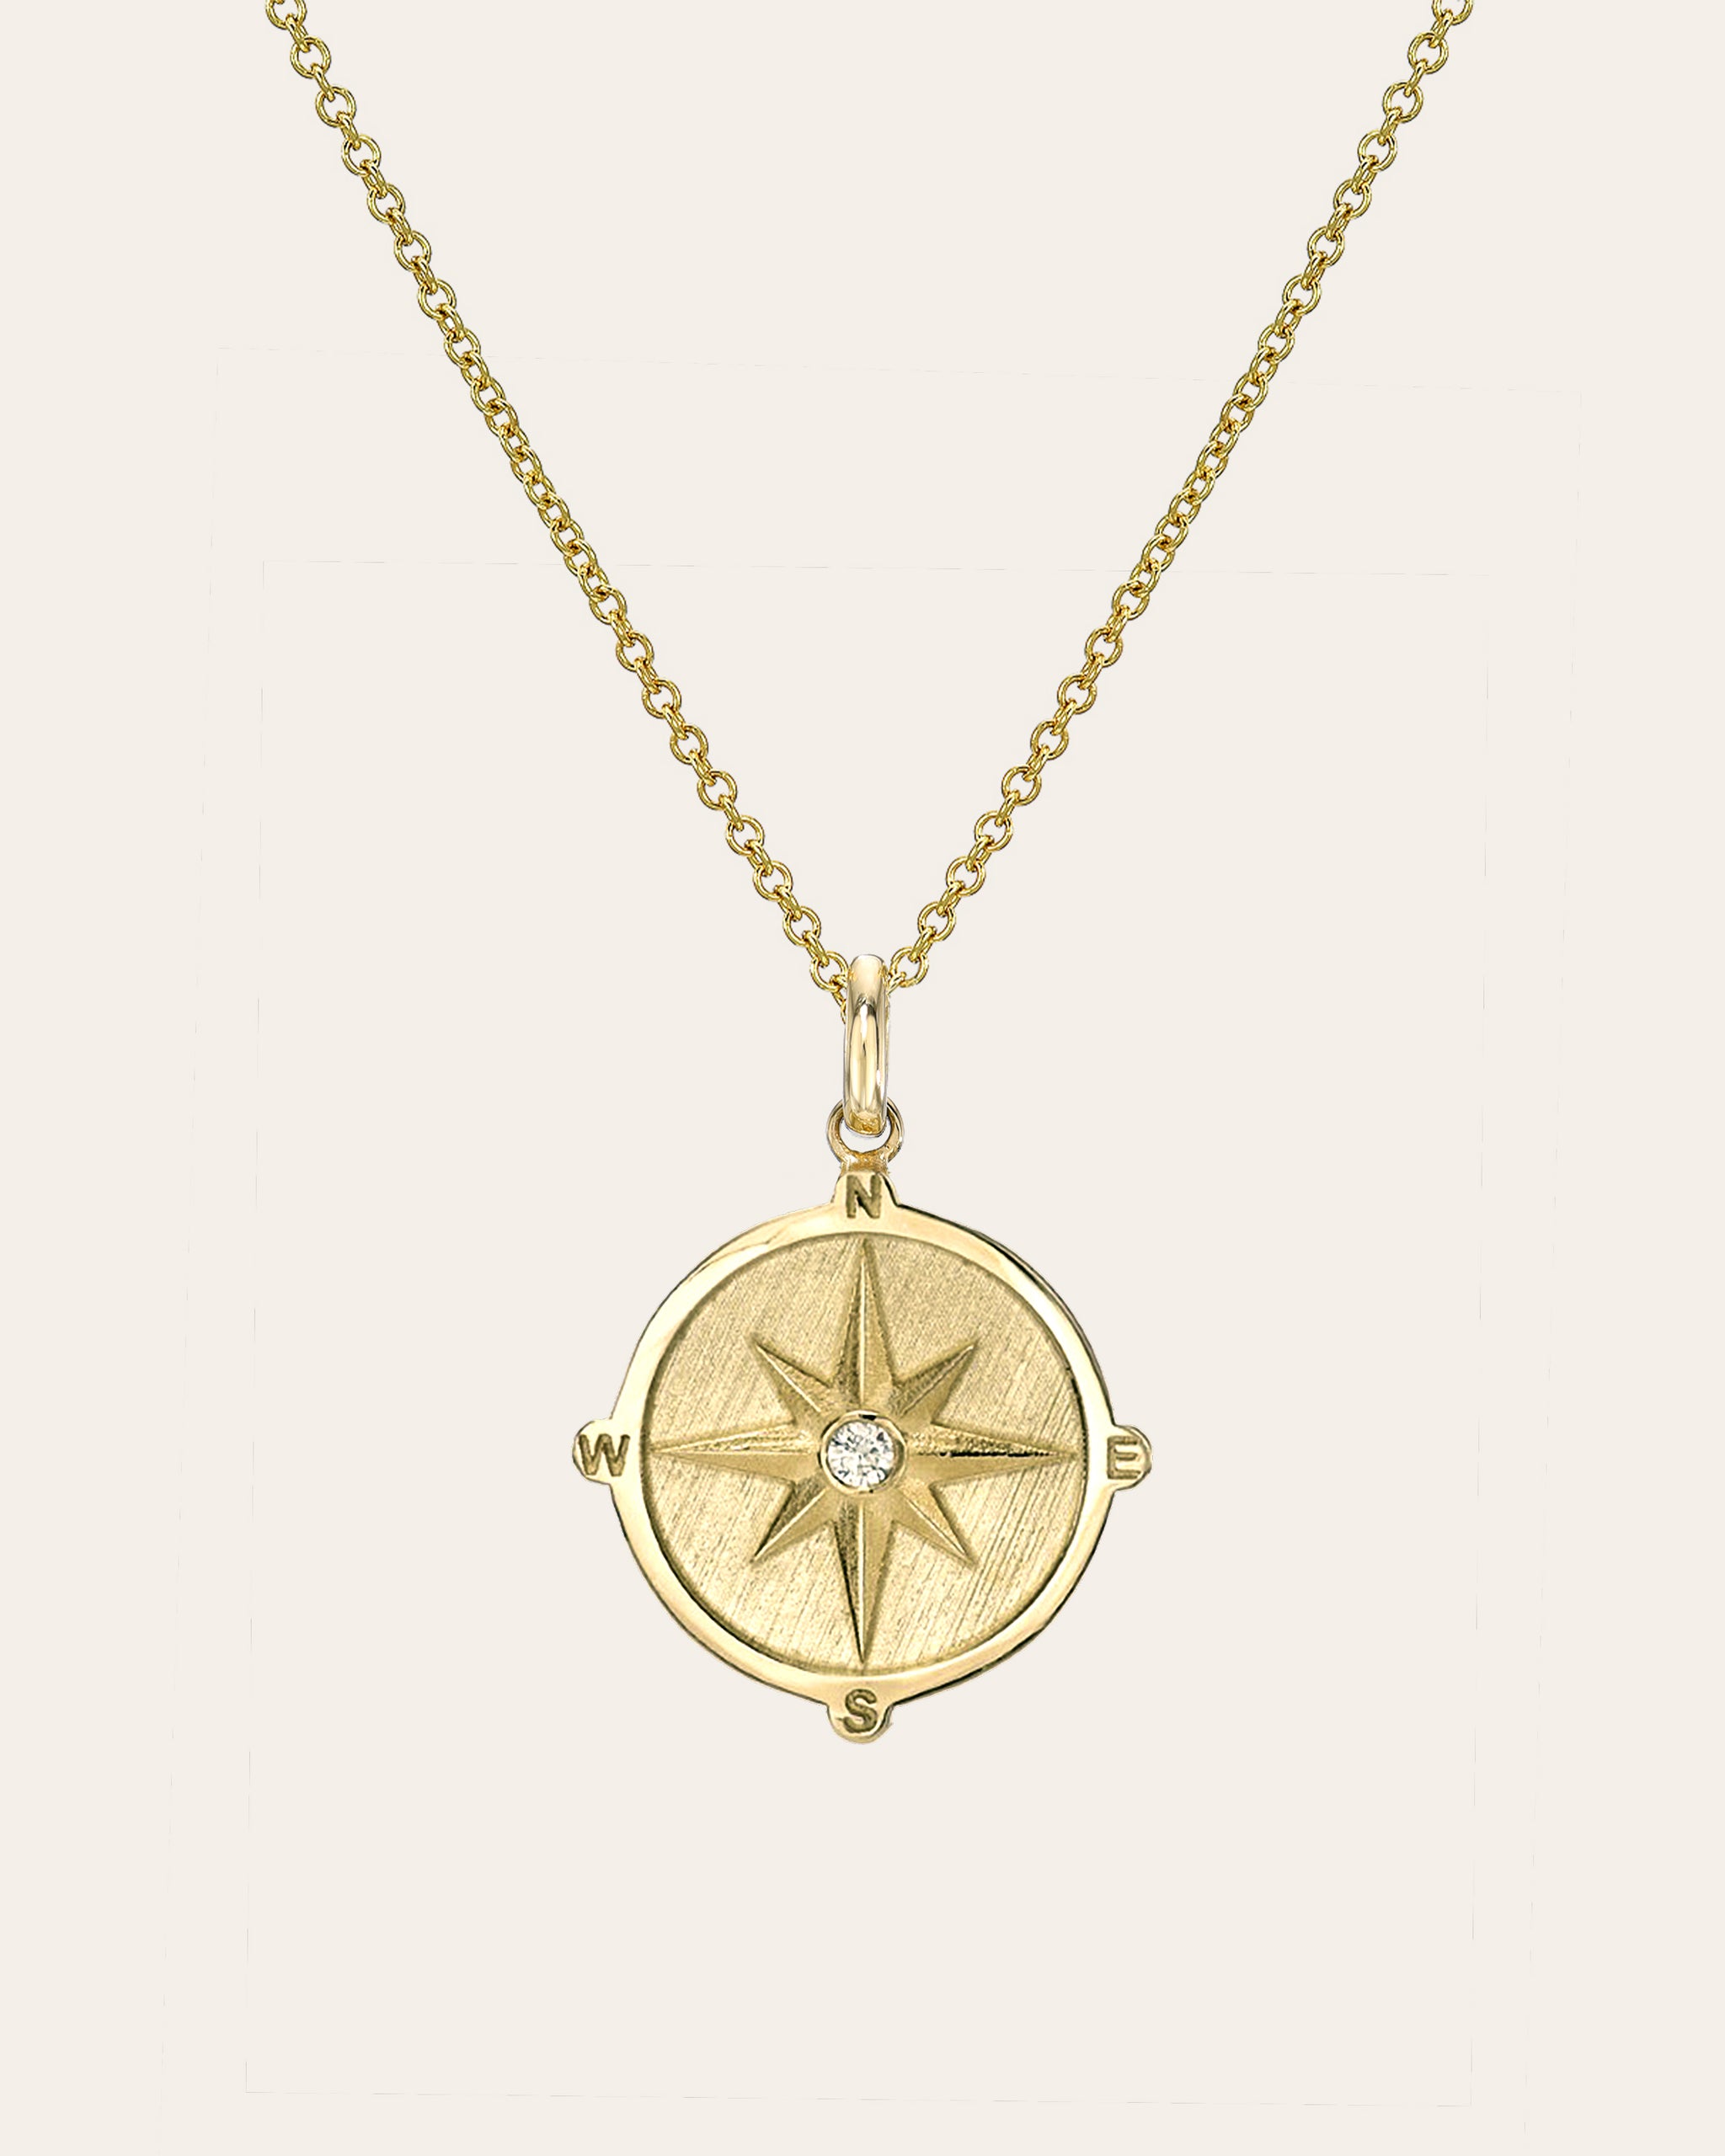 Buy Compass Necklace, Compass Jewelry, 14K Solid Gold Necklace, Compass  Gift, Compass Charm, Personalized Compass, Custom Pendant, Traveler Gift  Online in India - Etsy